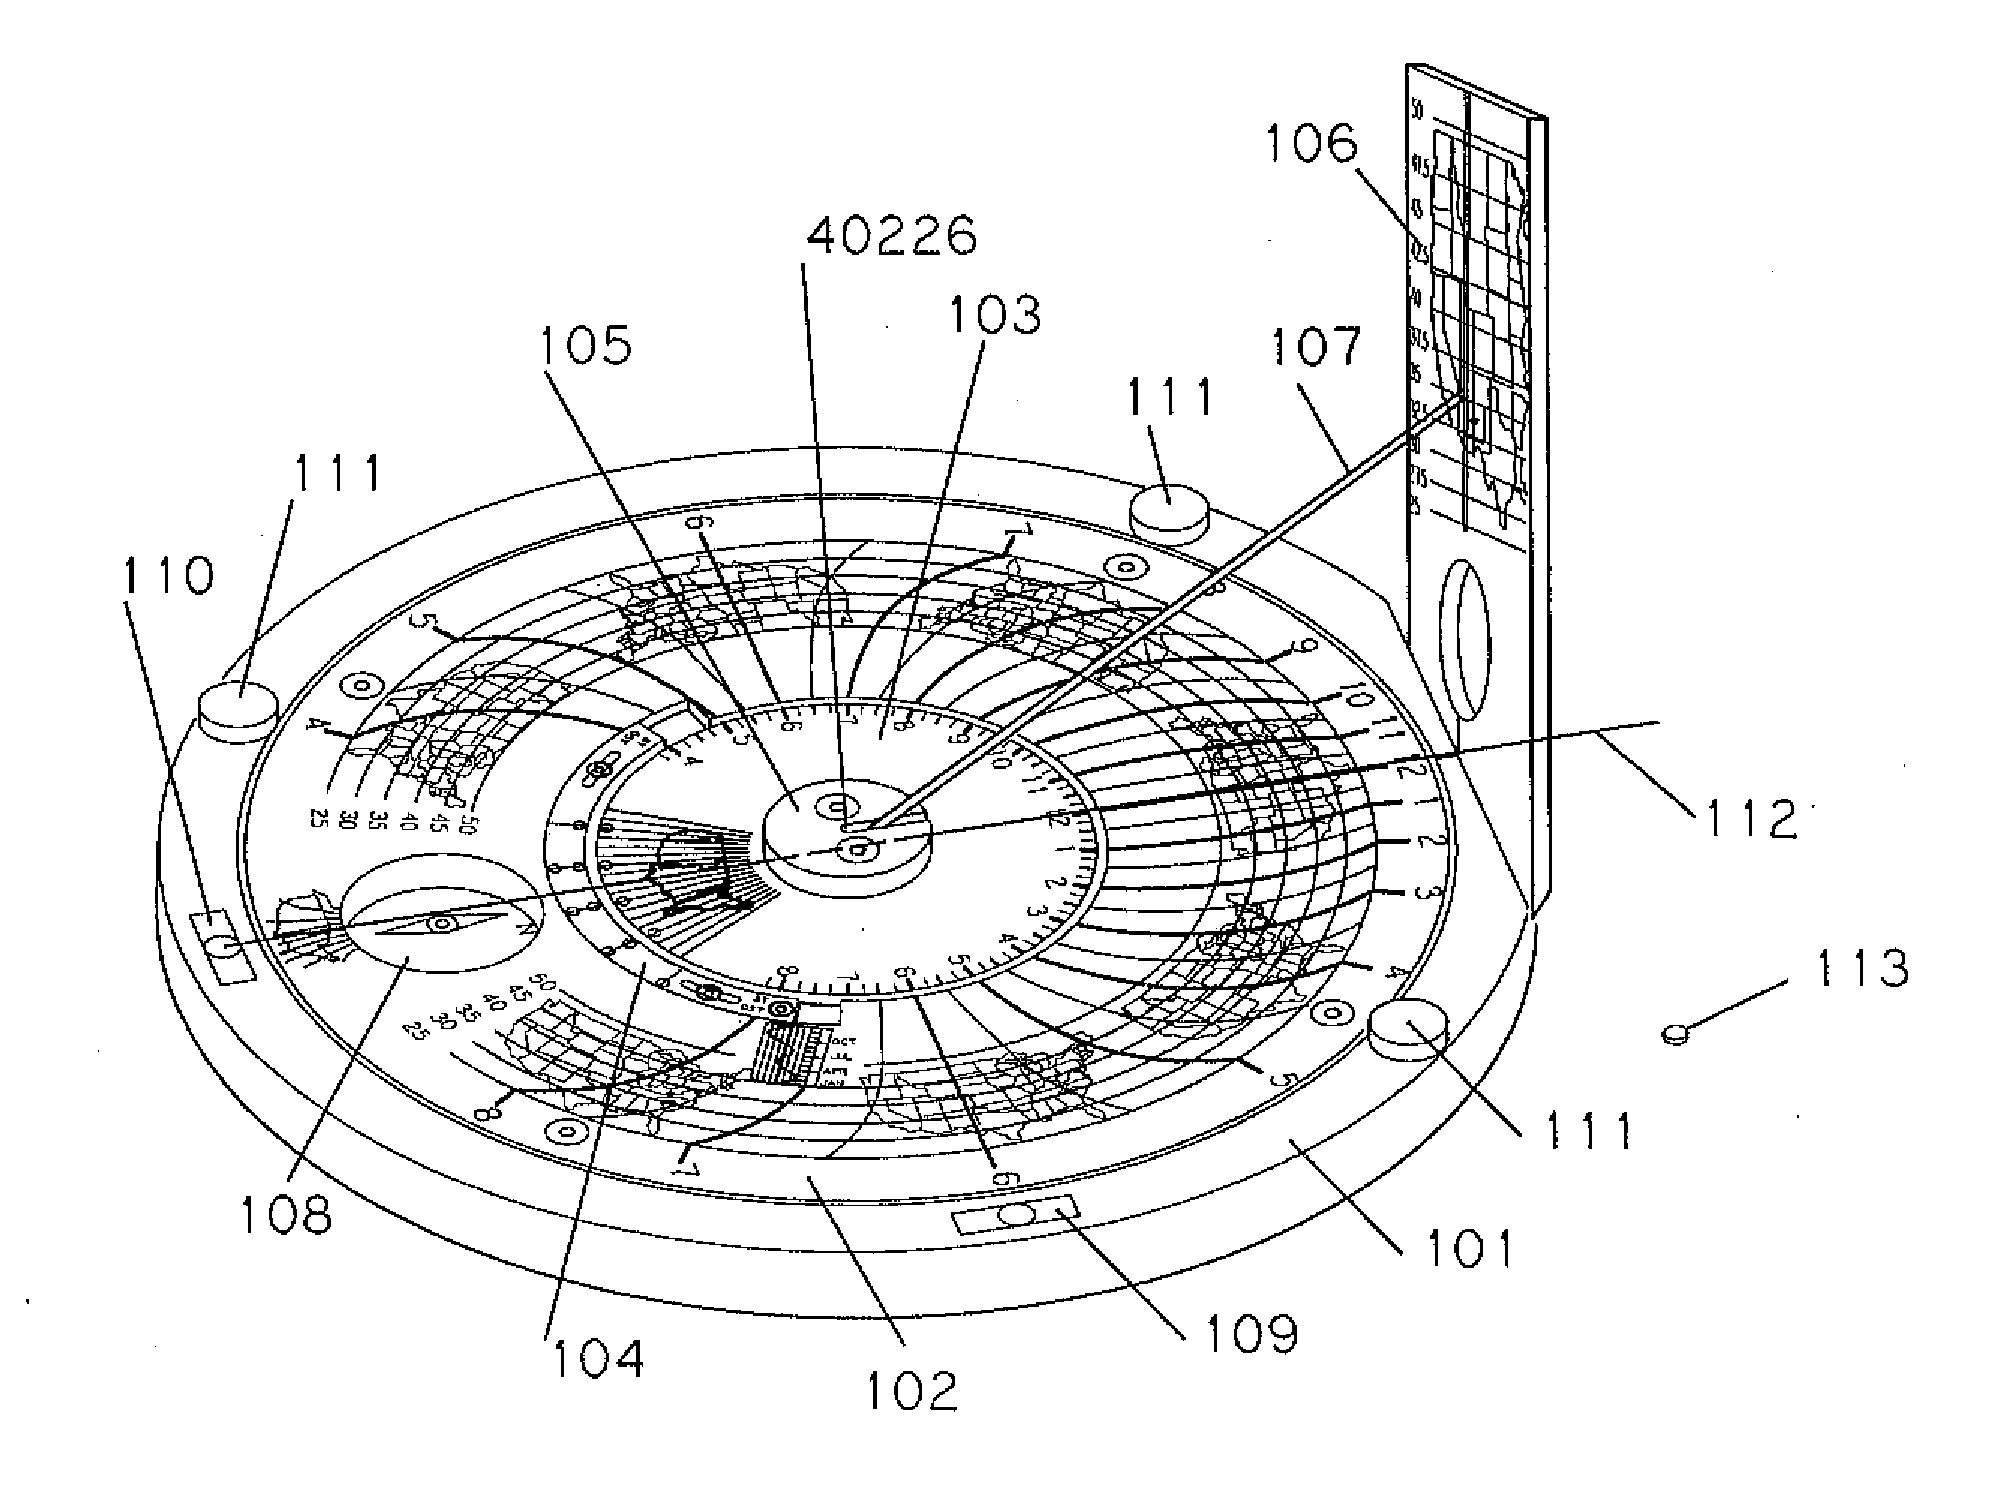 Sundial for telling solar time and clock time across a range of latitudes and longitudes